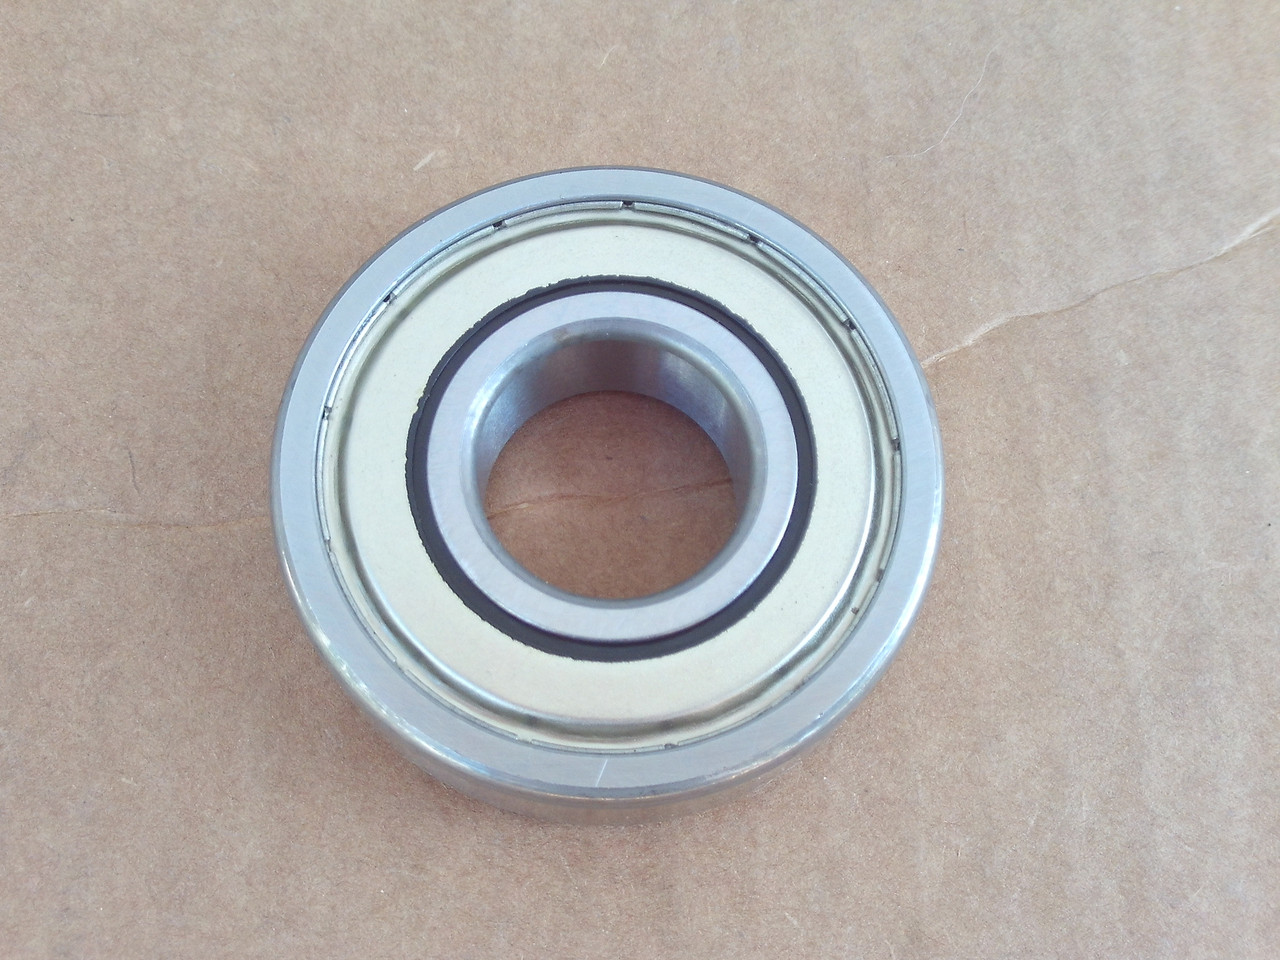 Spindle Bearing for Bad Boy 037602400 037-6024-00 ID: 0.984"= 1" OD: 2.44"= 2-3/8" Height: 0.669= 5/8"